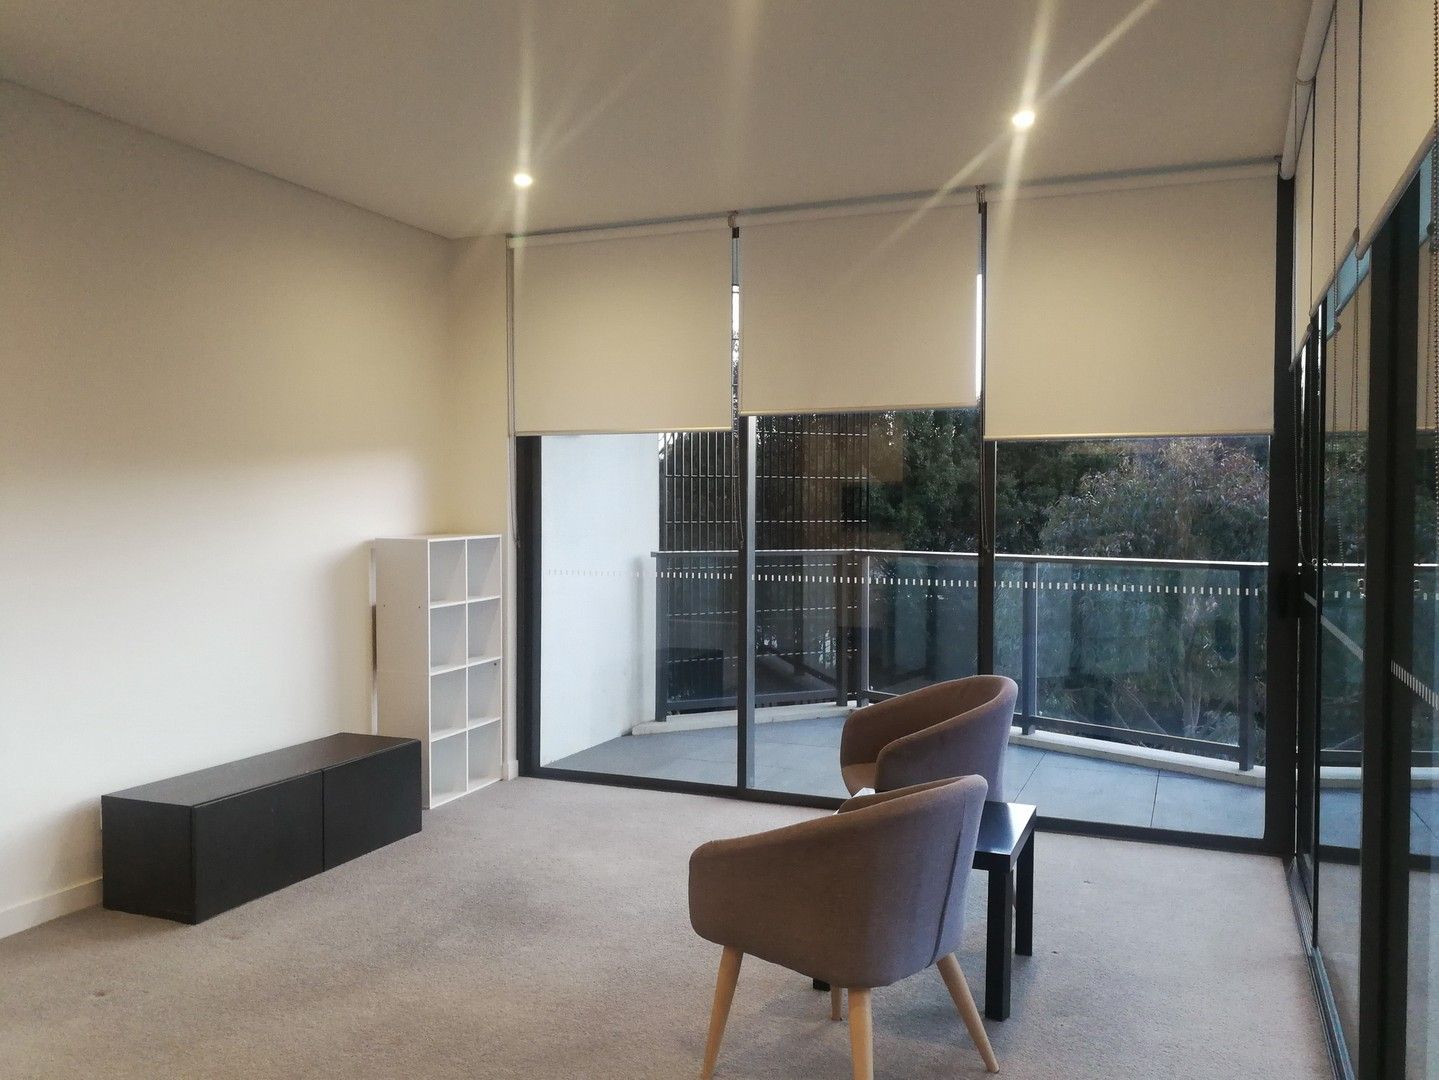 2 bedrooms Apartment / Unit / Flat in 1203/1 Scotsman street FOREST LODGE NSW, 2037